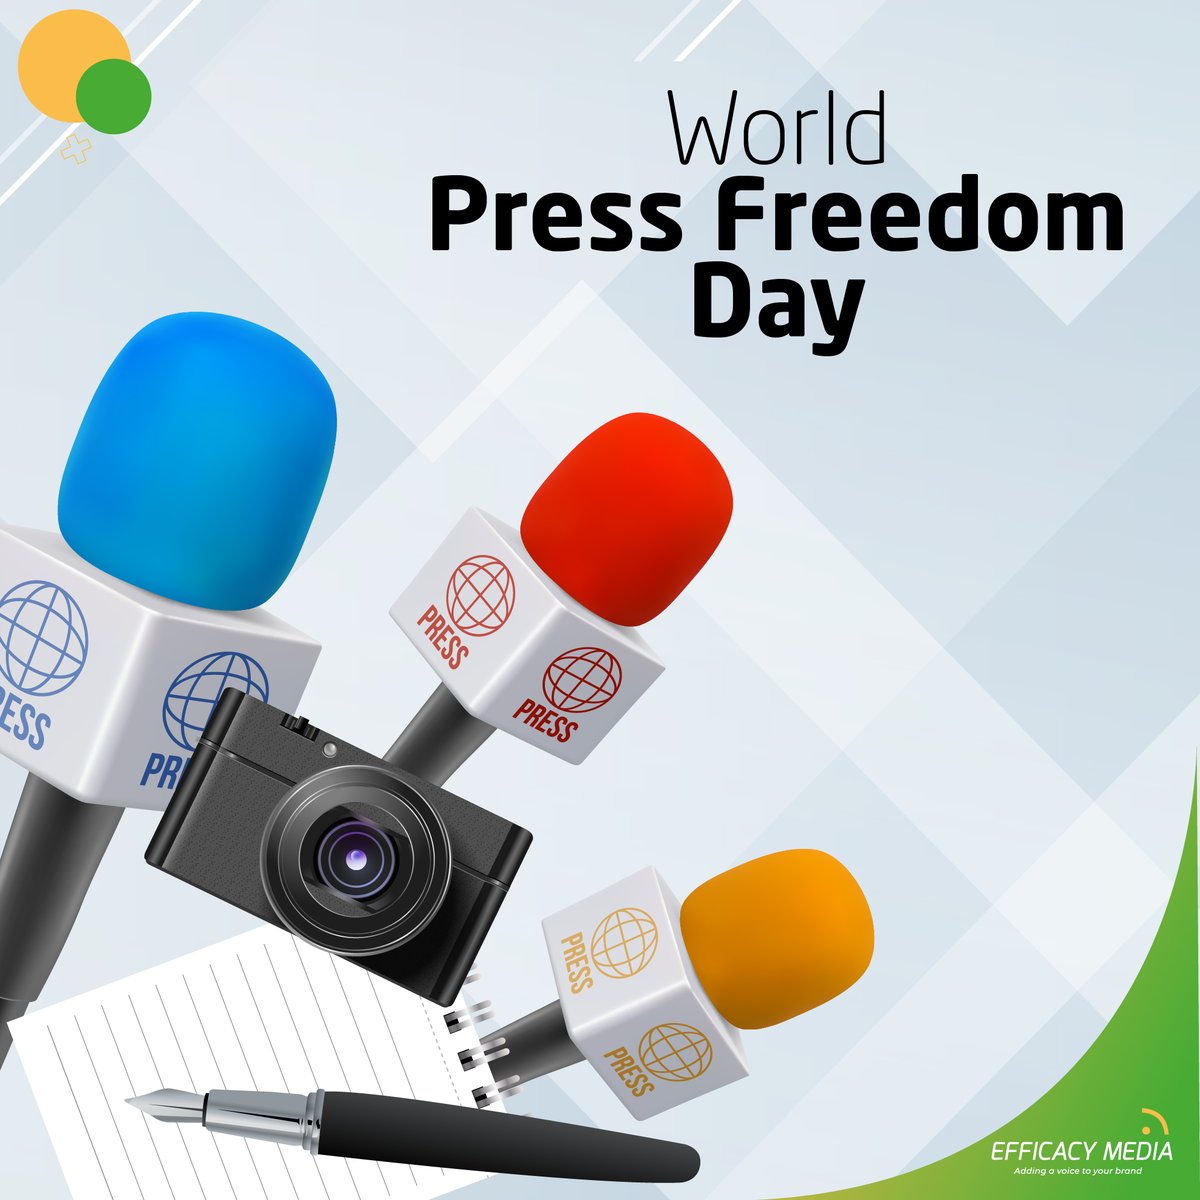 It's Press Freedom Day! At Efficacy Media, we recognize the vital role of a free and independent press in a functioning democracy. ⚖️

#EfficacyMedia #PressFreedomDay #FreePress #JournalismMatters